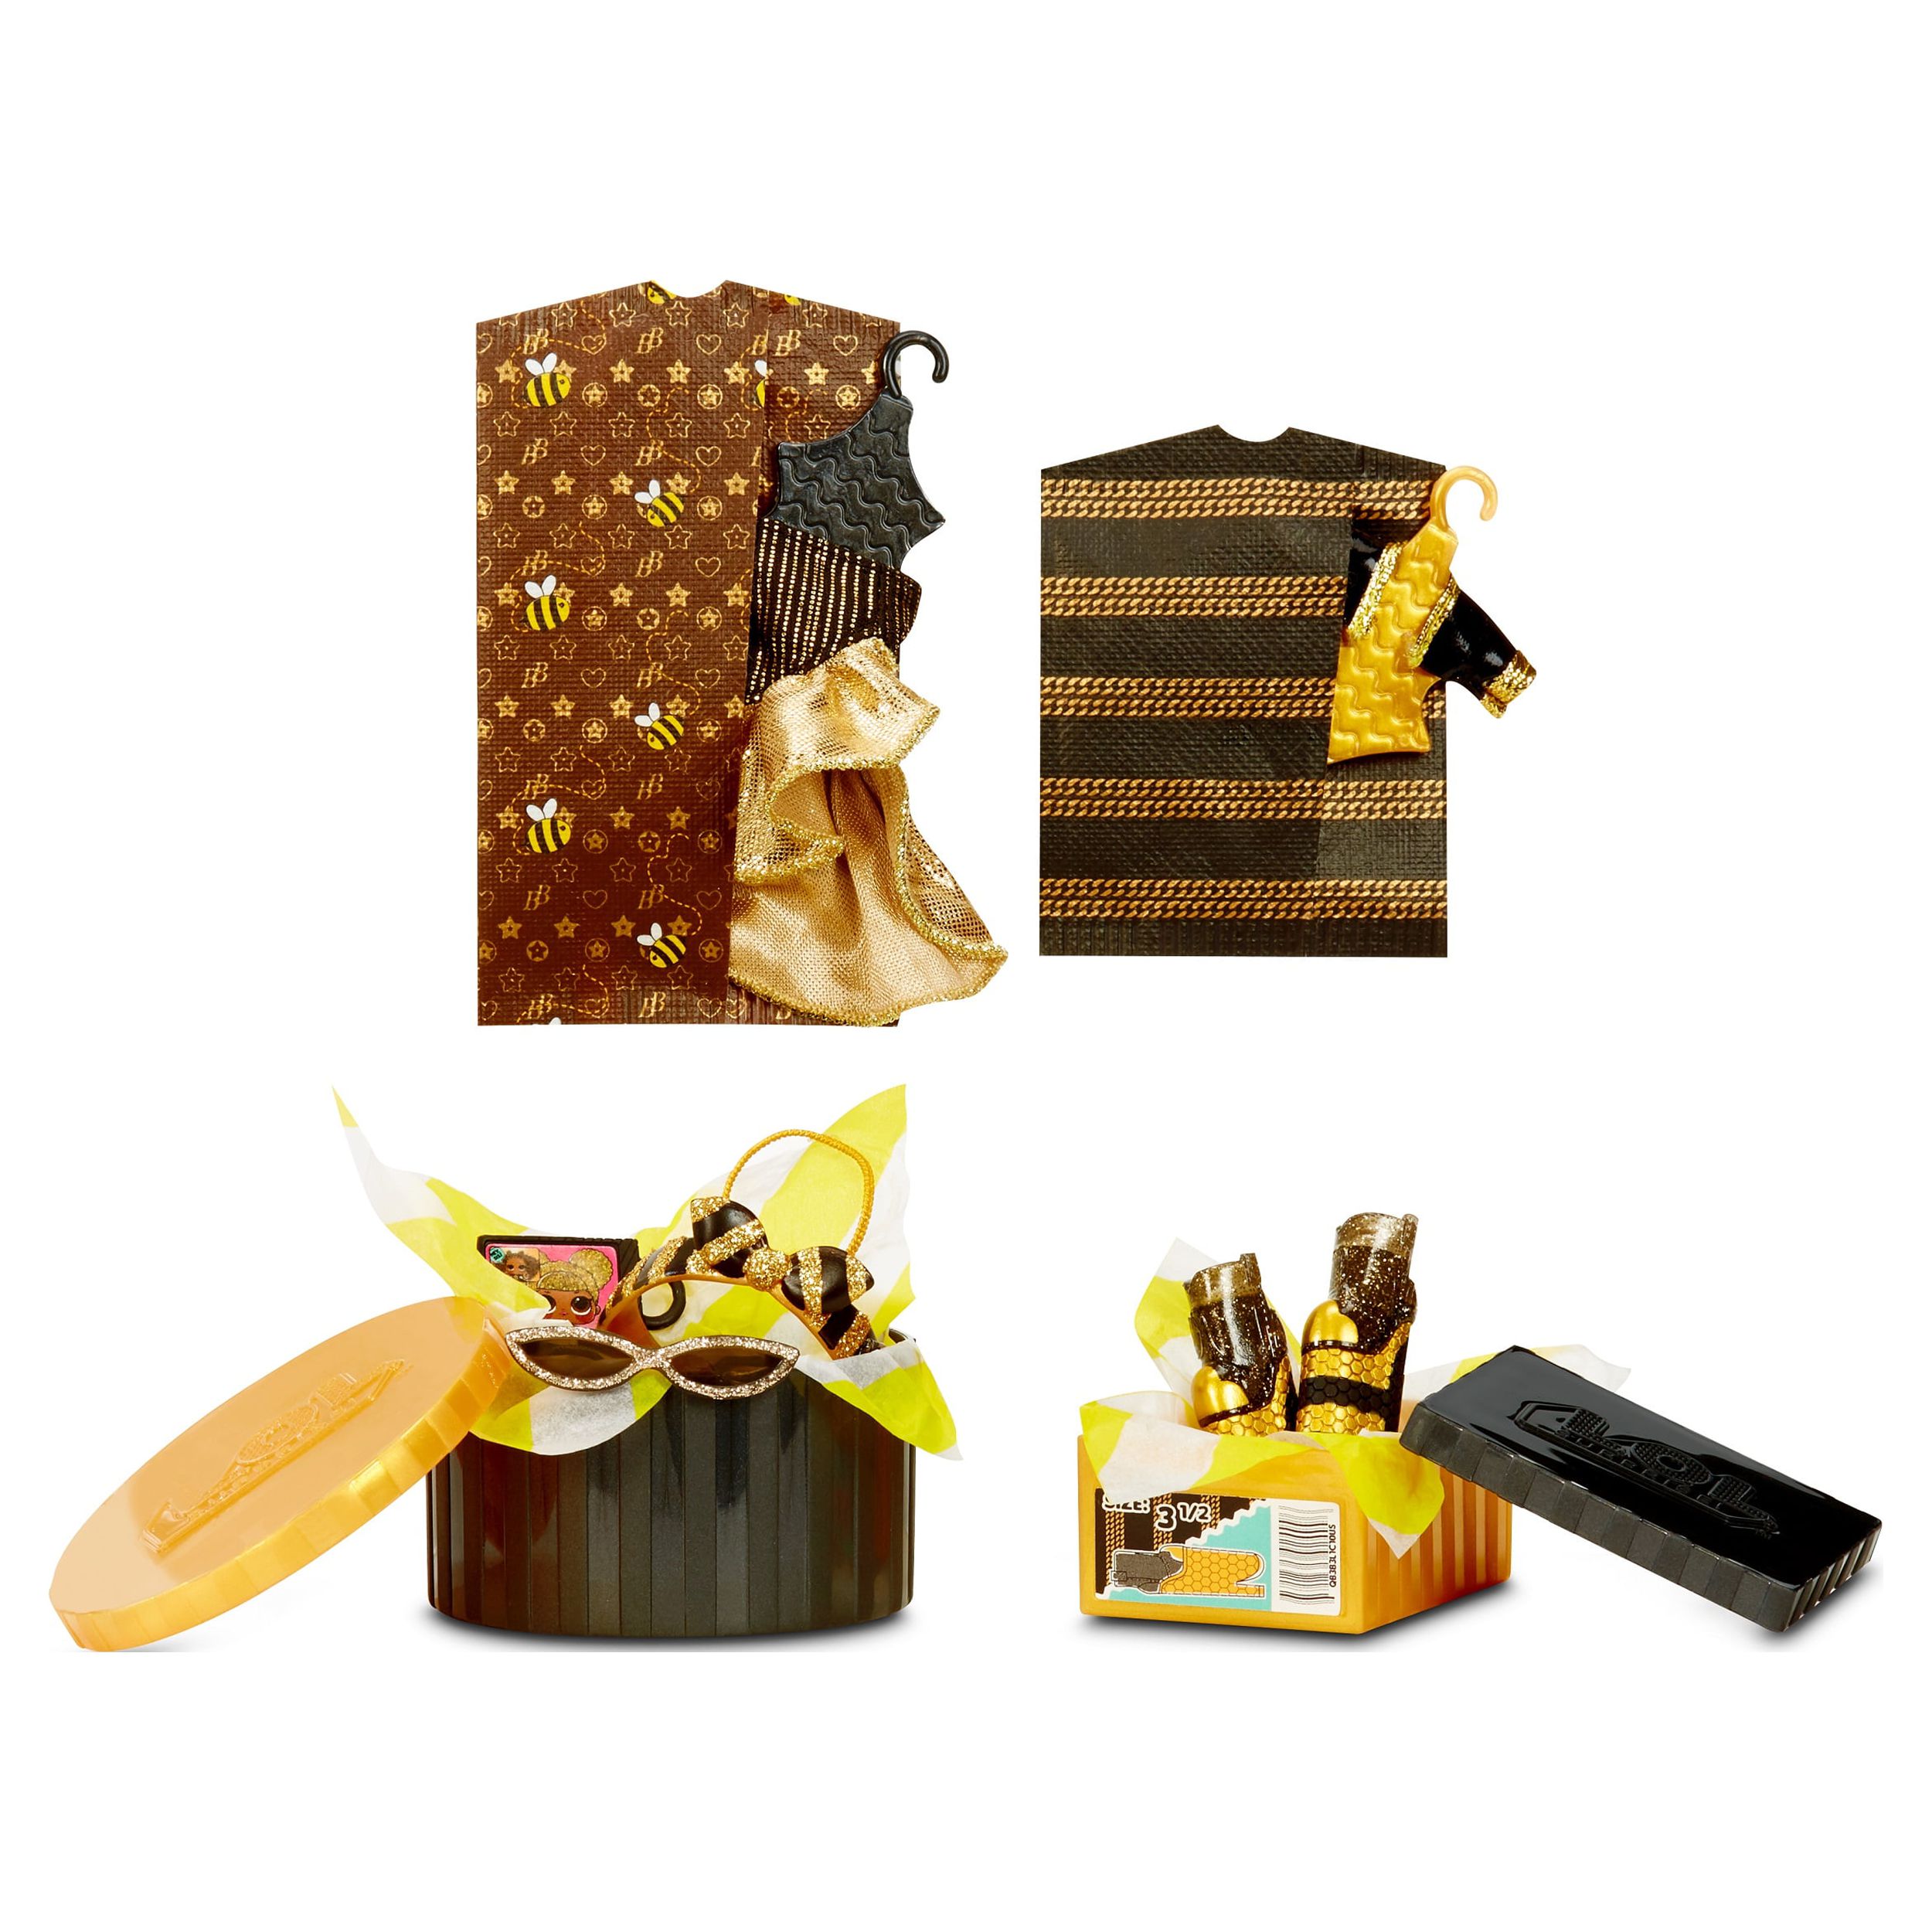 LOL Surprise JK Queen Bee Mini Fashion Doll With 15 Surprises, Great Gift for Kids Ages 4 5 6+ - image 5 of 7